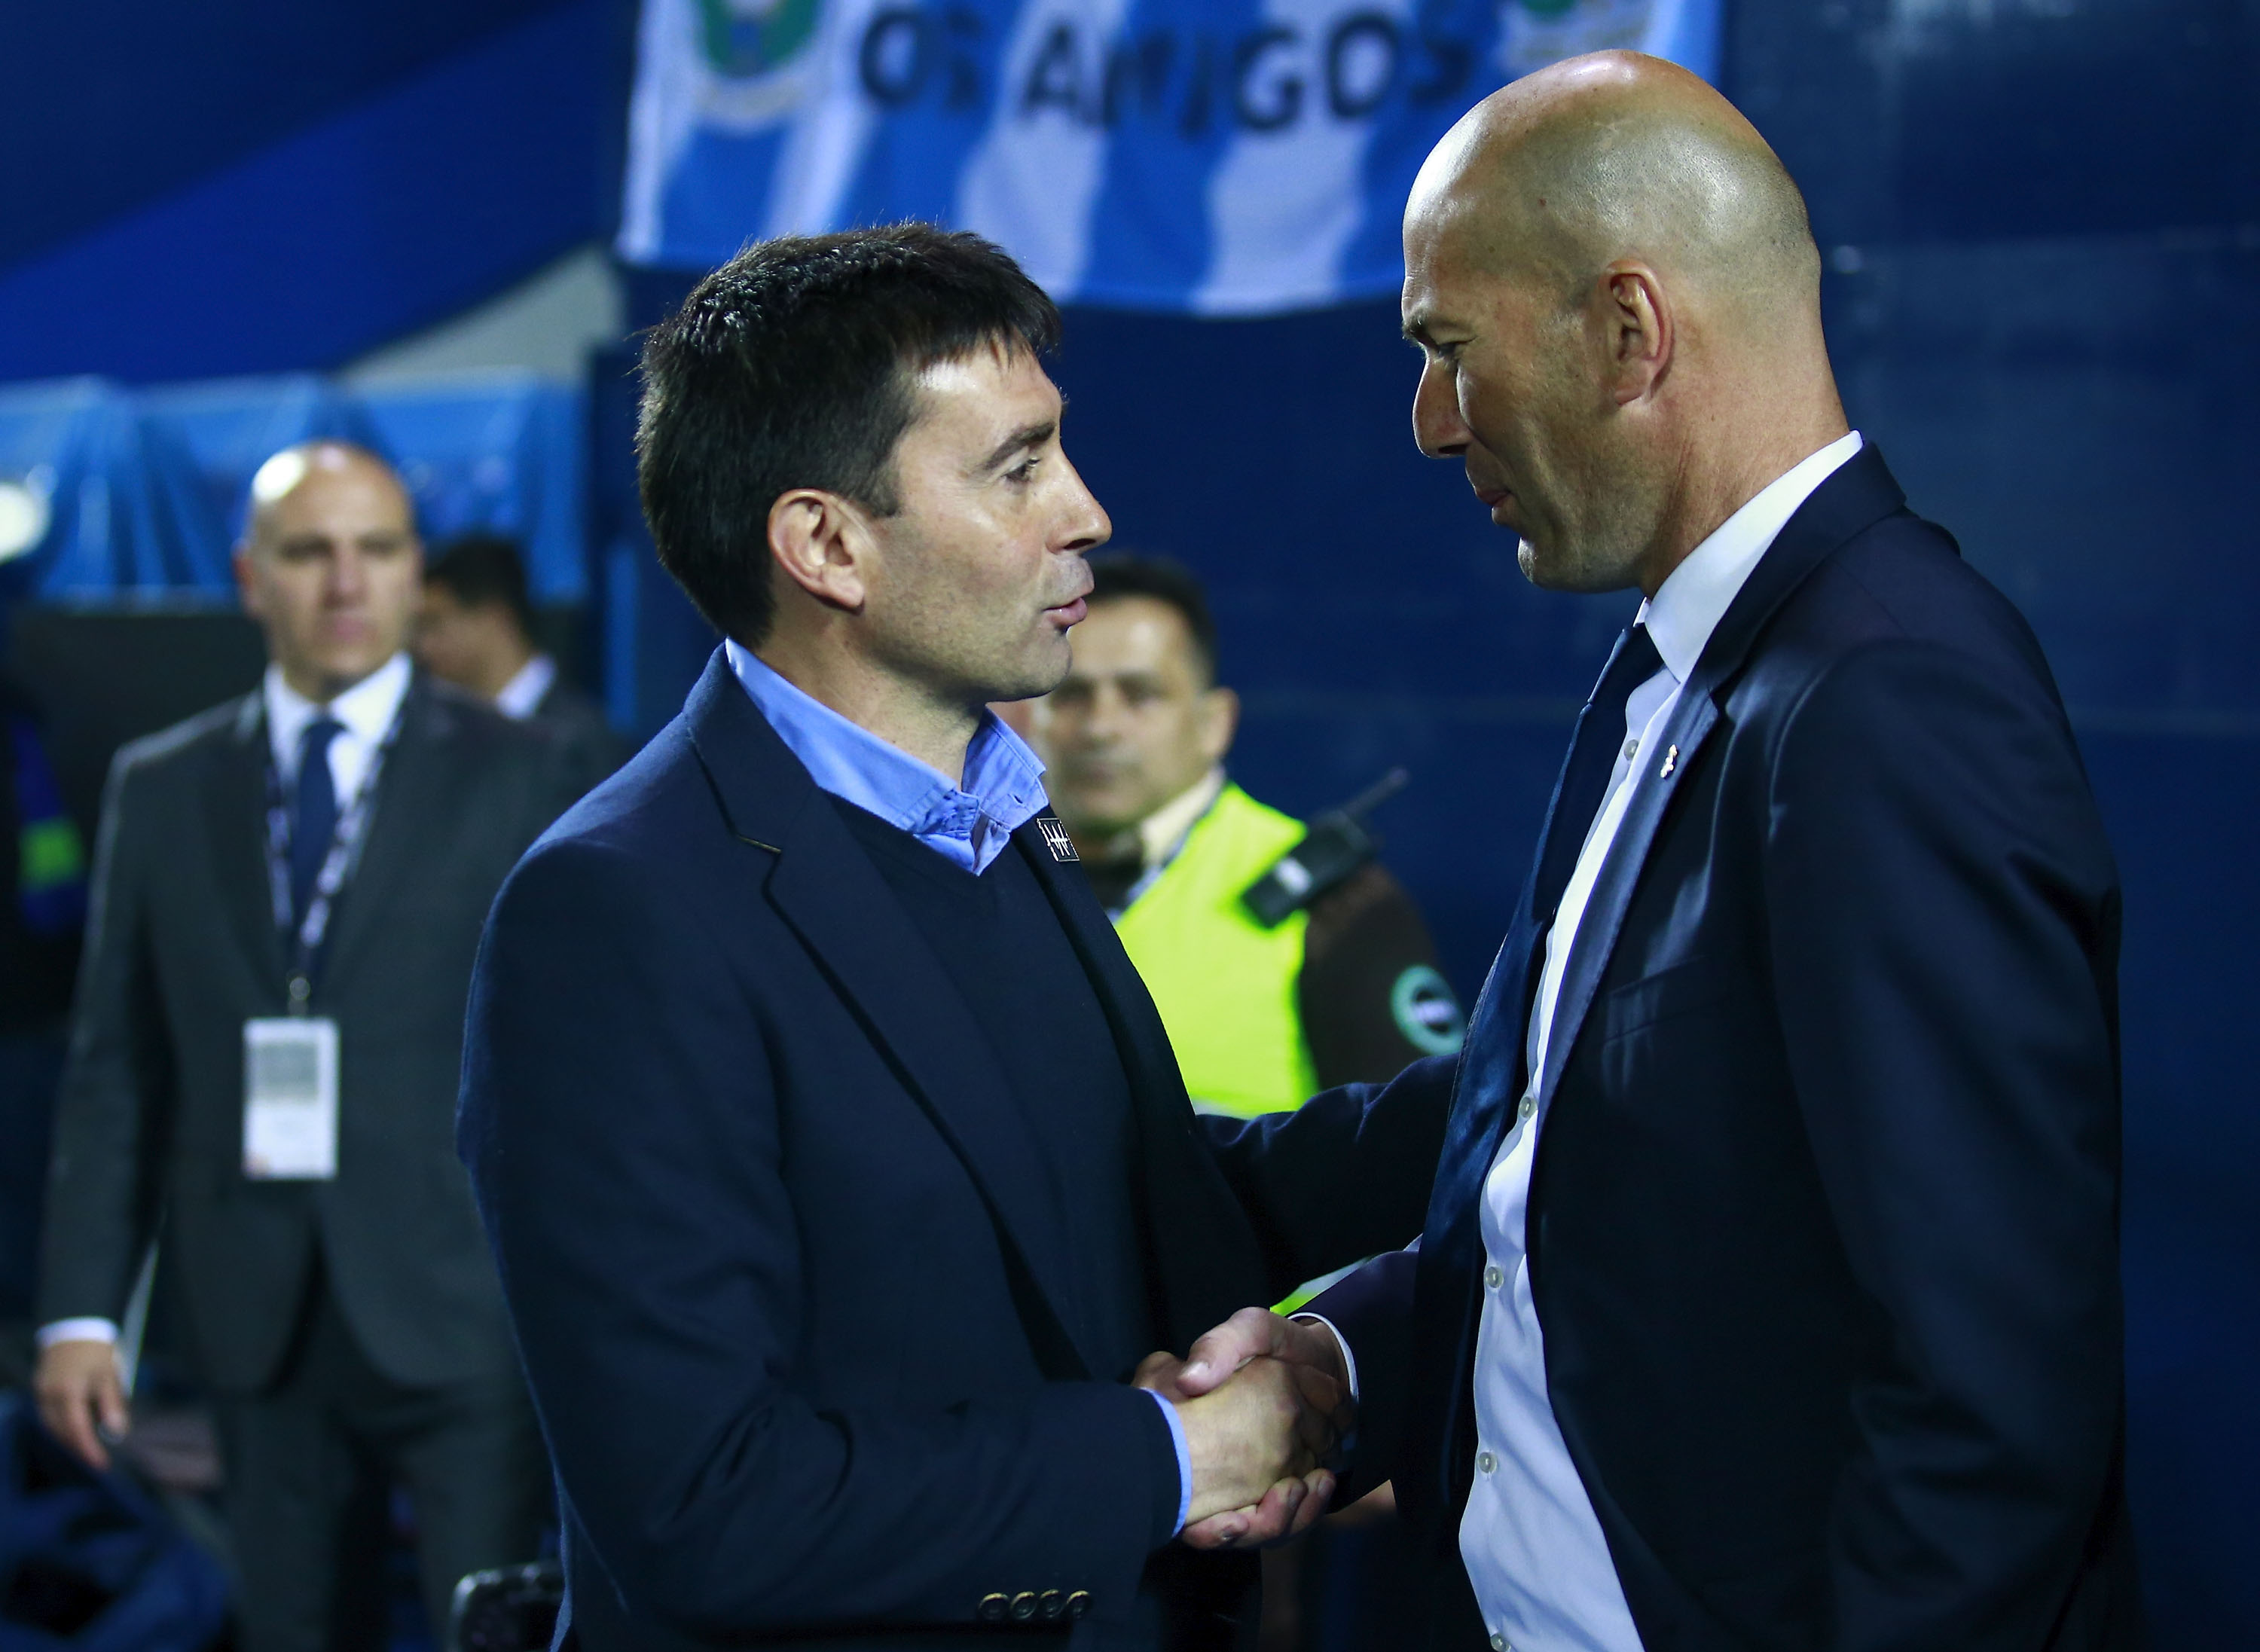 LEGANES, MADRID - APRIL 05: Head coach Asier Garitano (L) (L) shakes hands with coach Zinedine Zidane (R) of Real Madrid CF during the La Liga match between CD Leganes and Real Madrid CF at Estadio Municipal de Butarque on April 5, 2017 in Leganes, Spain.  (Photo by Gonzalo Arroyo Moreno/Getty Images)